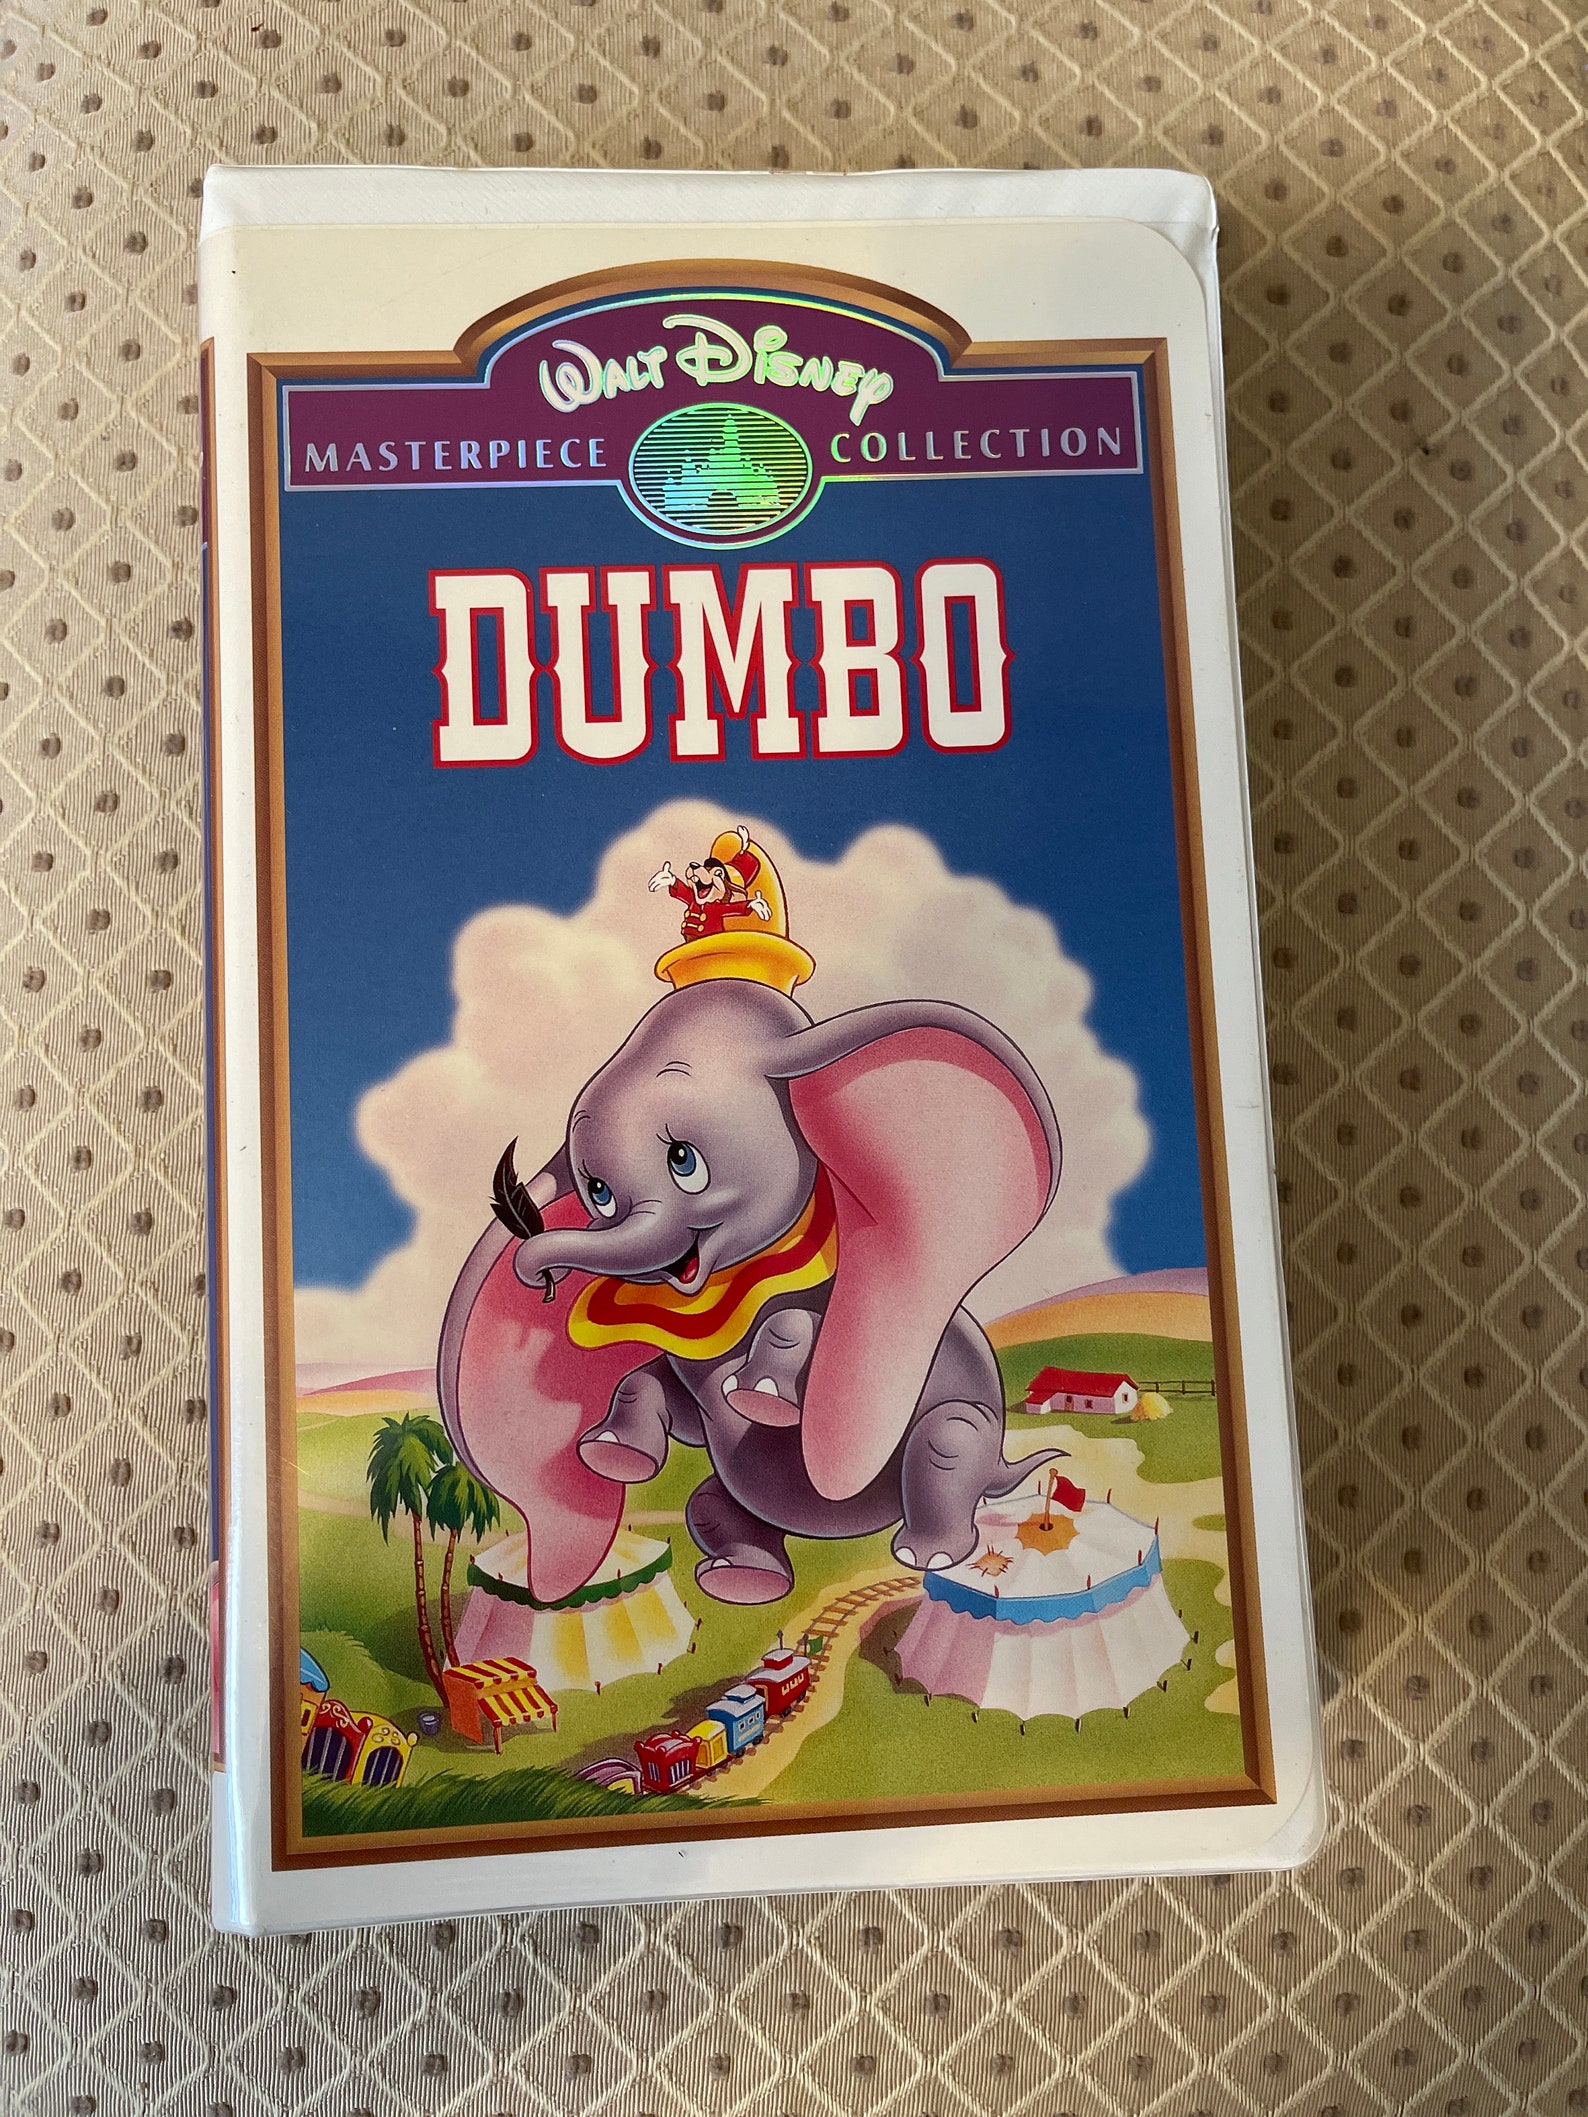 Lot Of Walt Disney Vhs Movies Masterpiece Collection Dumbo Bambi Snow